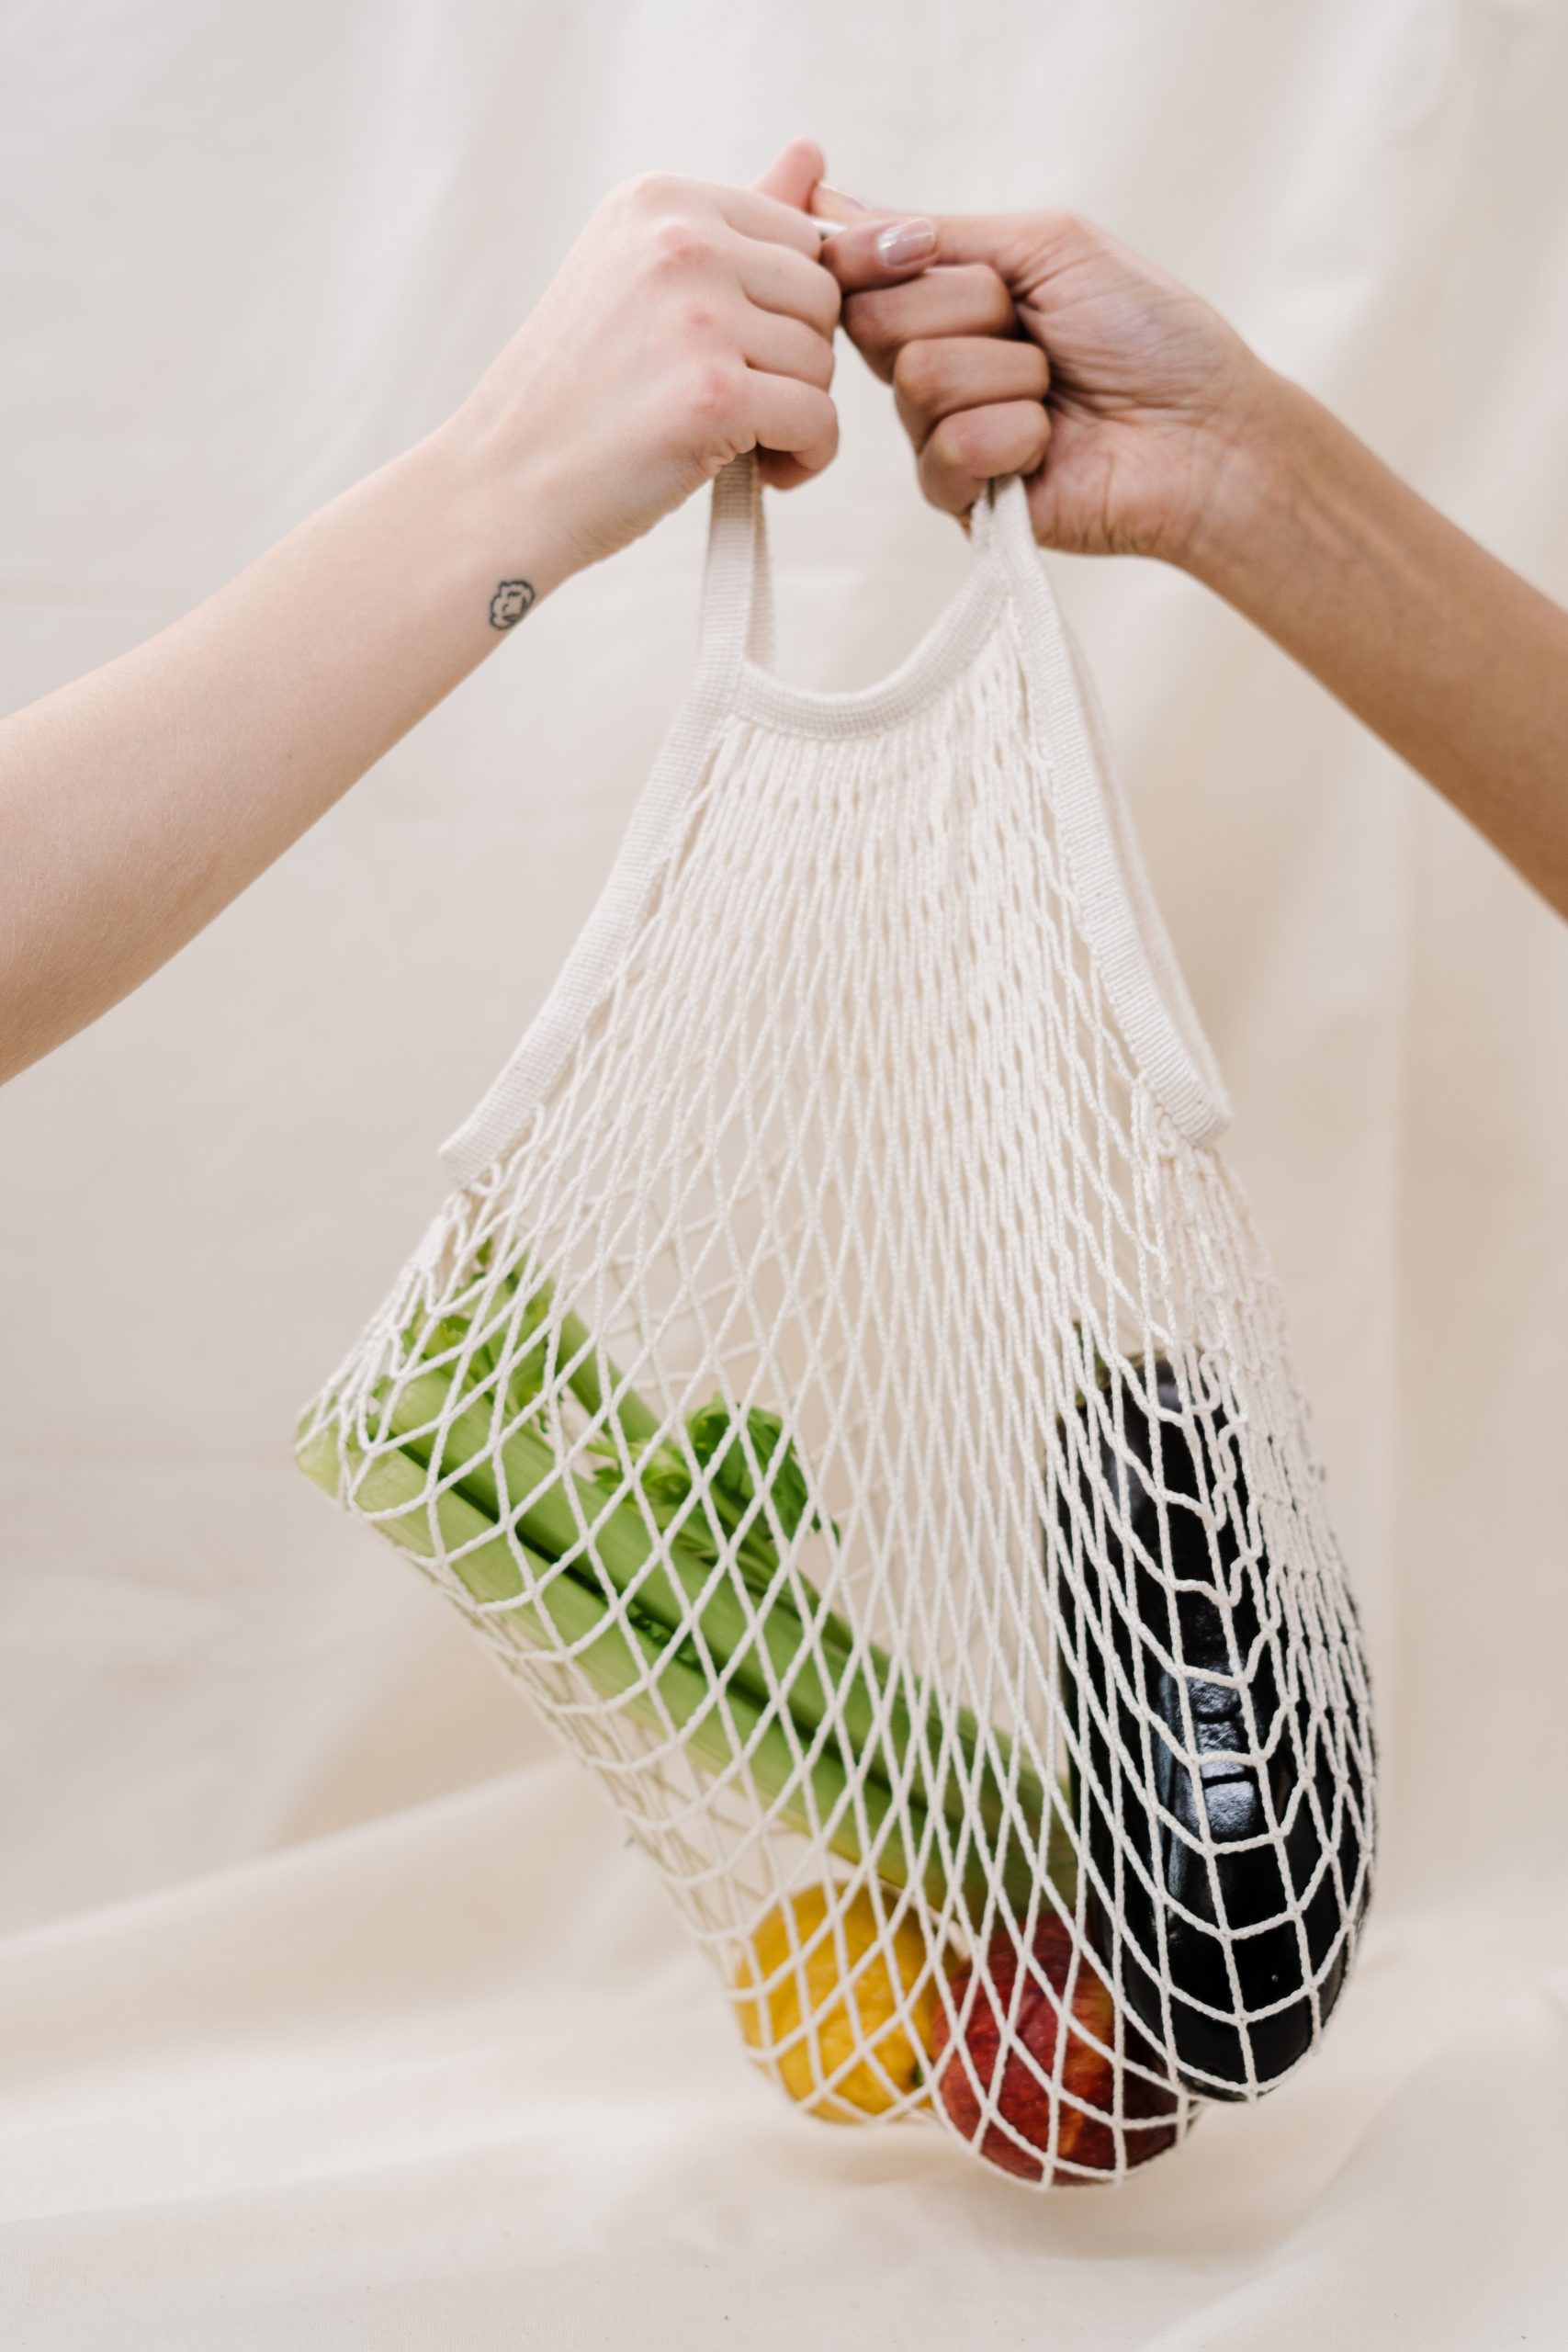 reuseable grocery shopping bag for food delivery or pickup